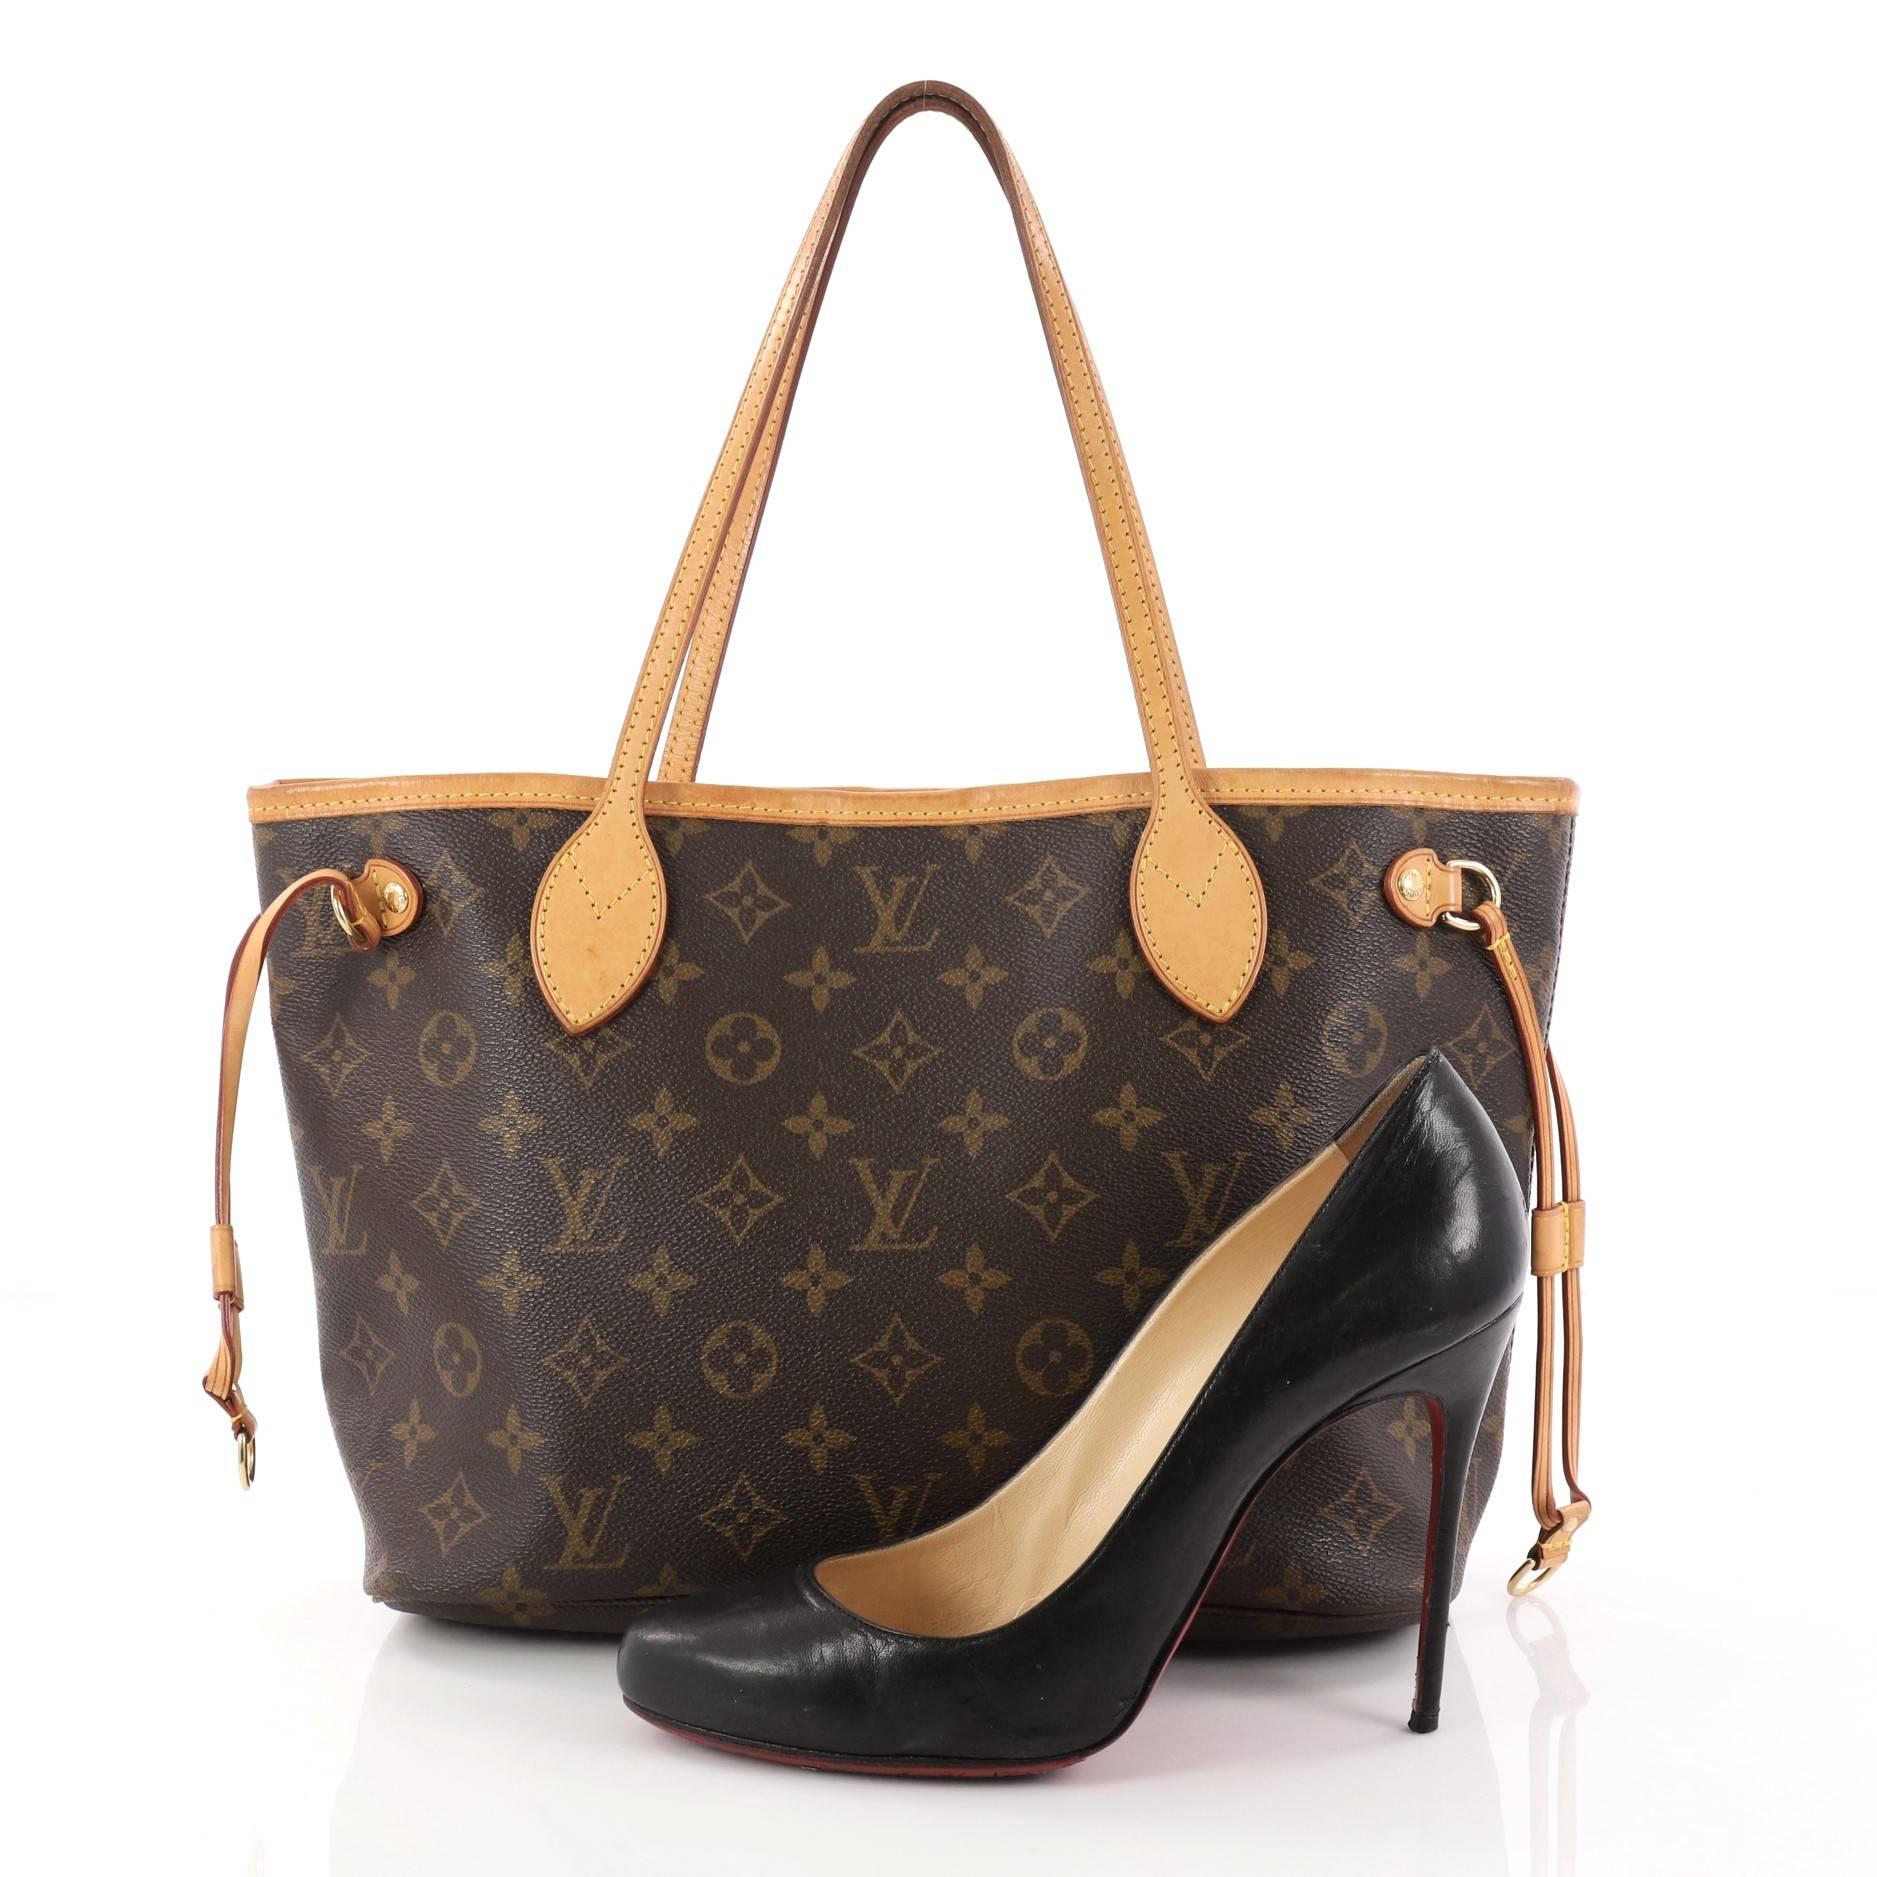 This authentic Louis Vuitton Neverfull Tote Monogram Canvas PM is a perfect companion for daily excursions. Crafted from Louis Vuitton's signature brown monogram coated canvas, this iconic easy-to-carry bag features natural cowhide leather trim,